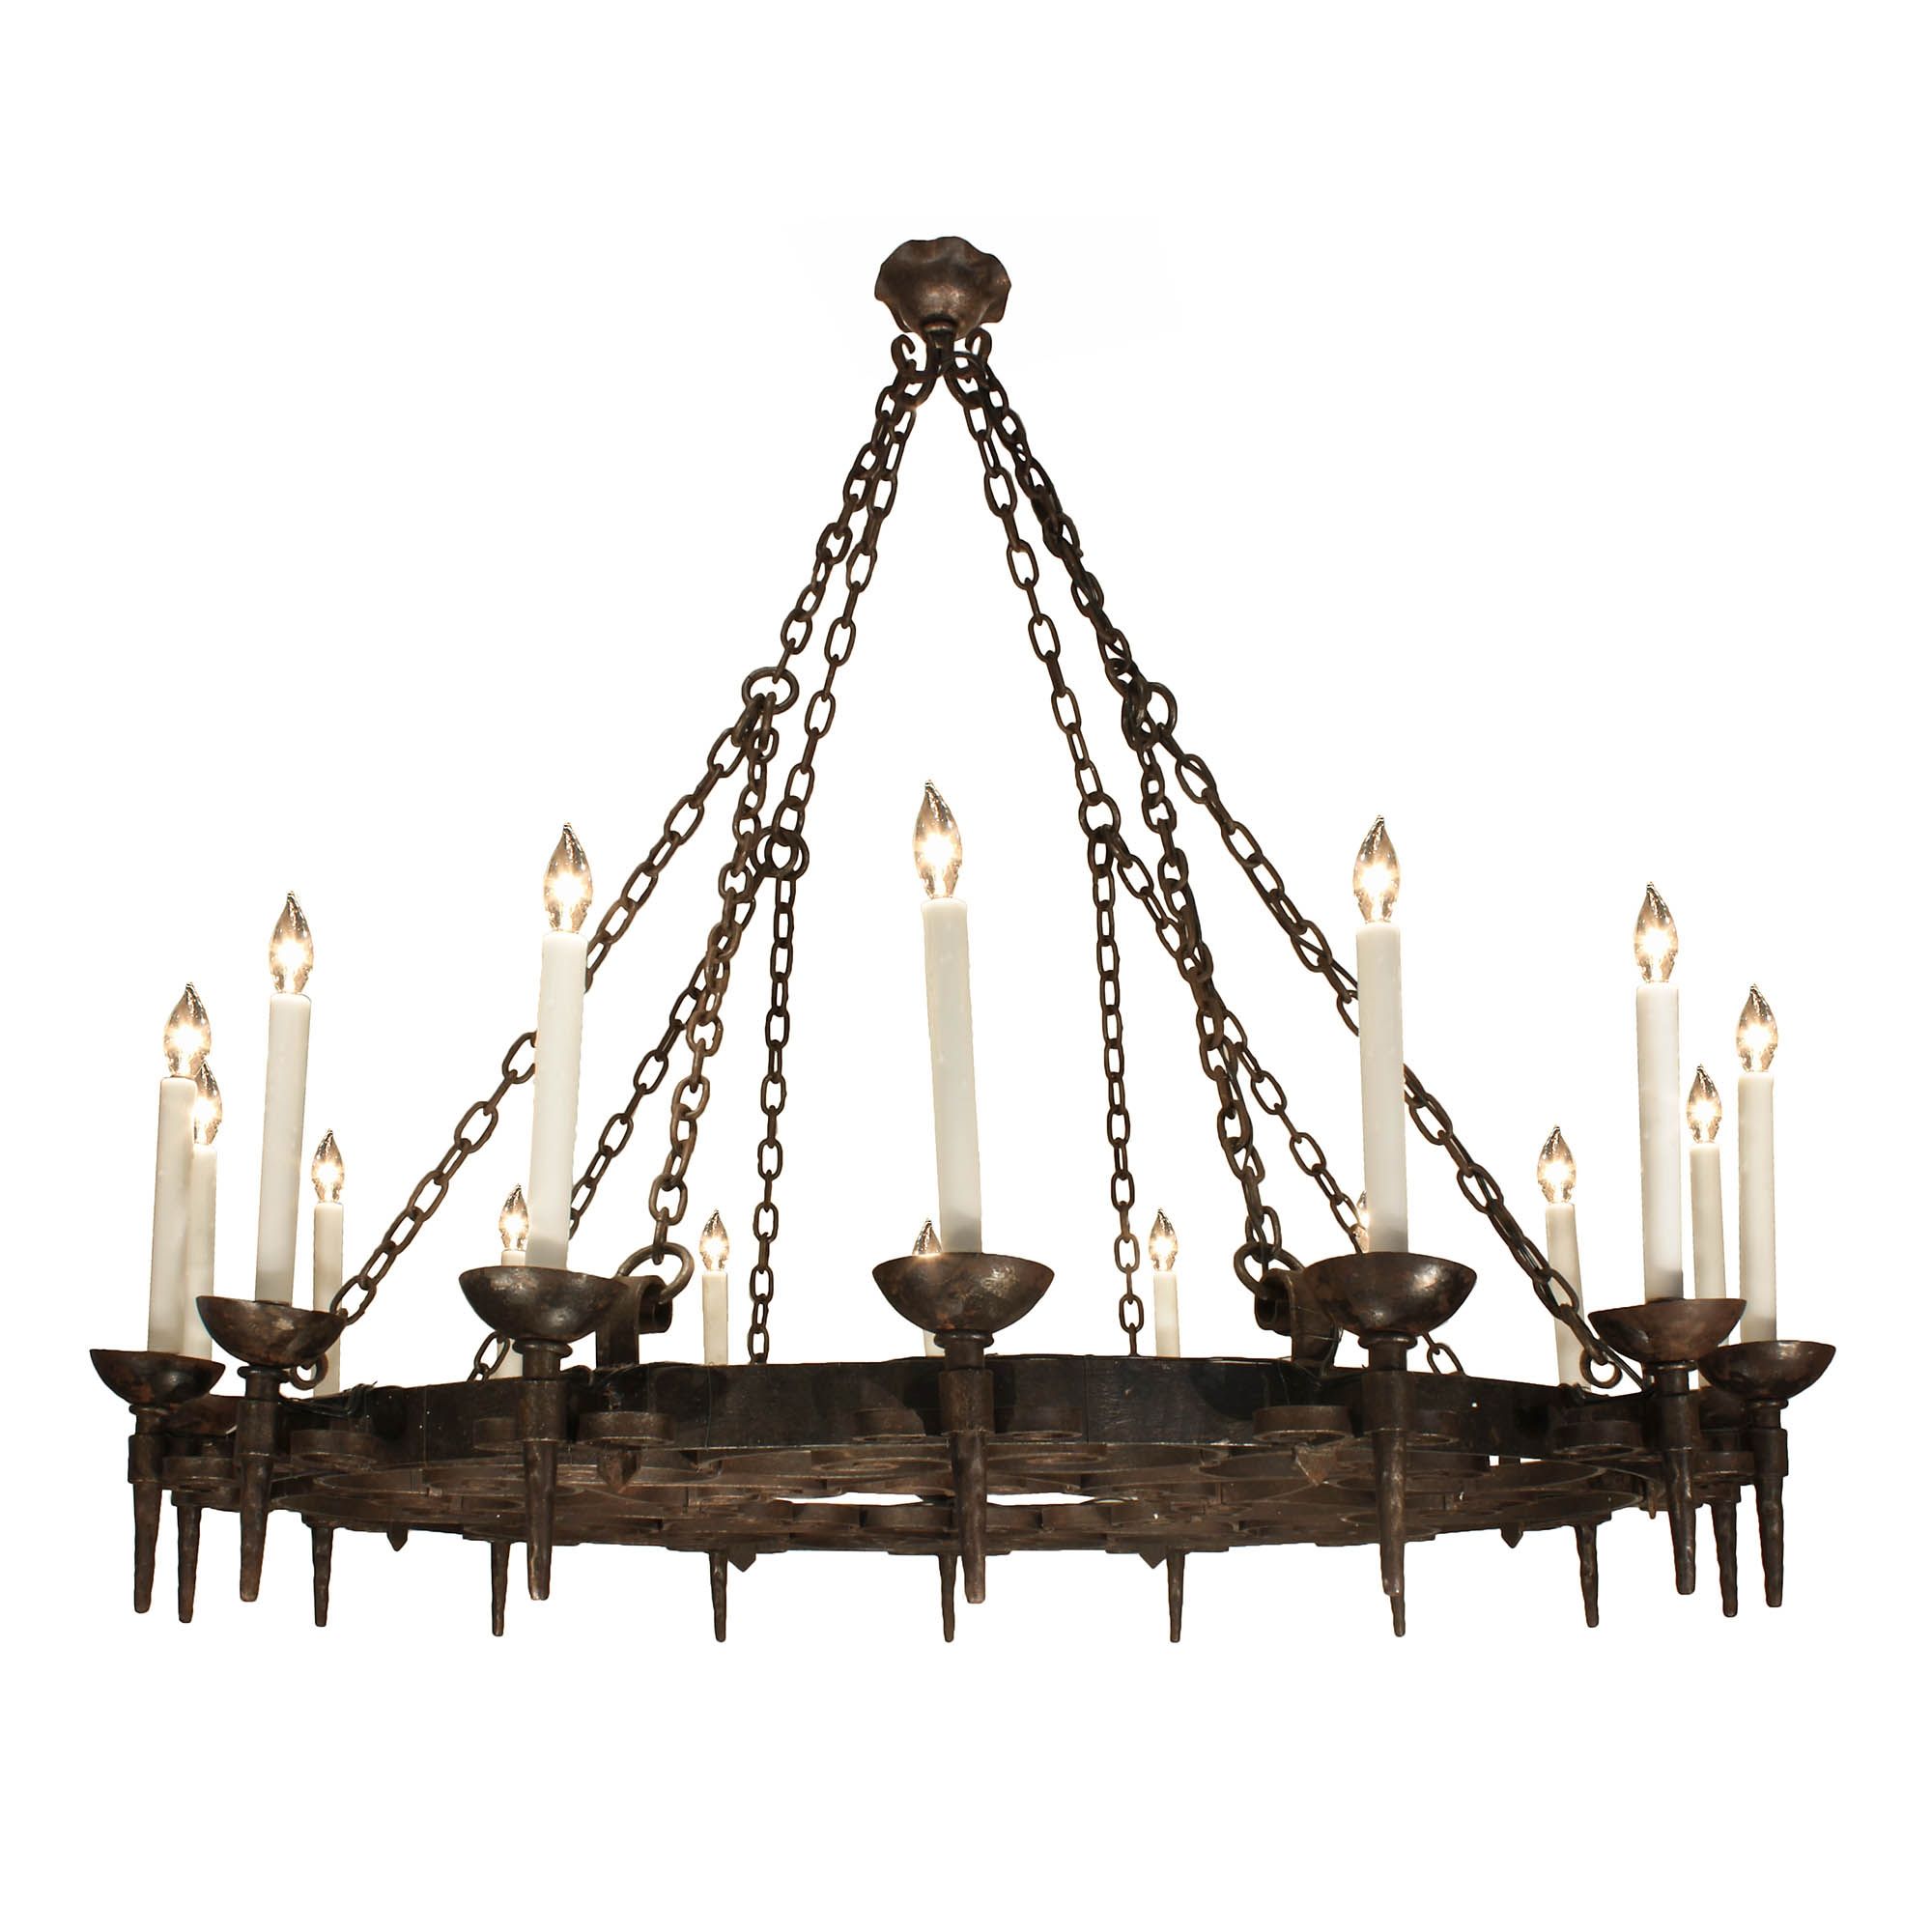 Antique Chandeliers Inventory Intended For Large Iron Chandelier (View 6 of 15)